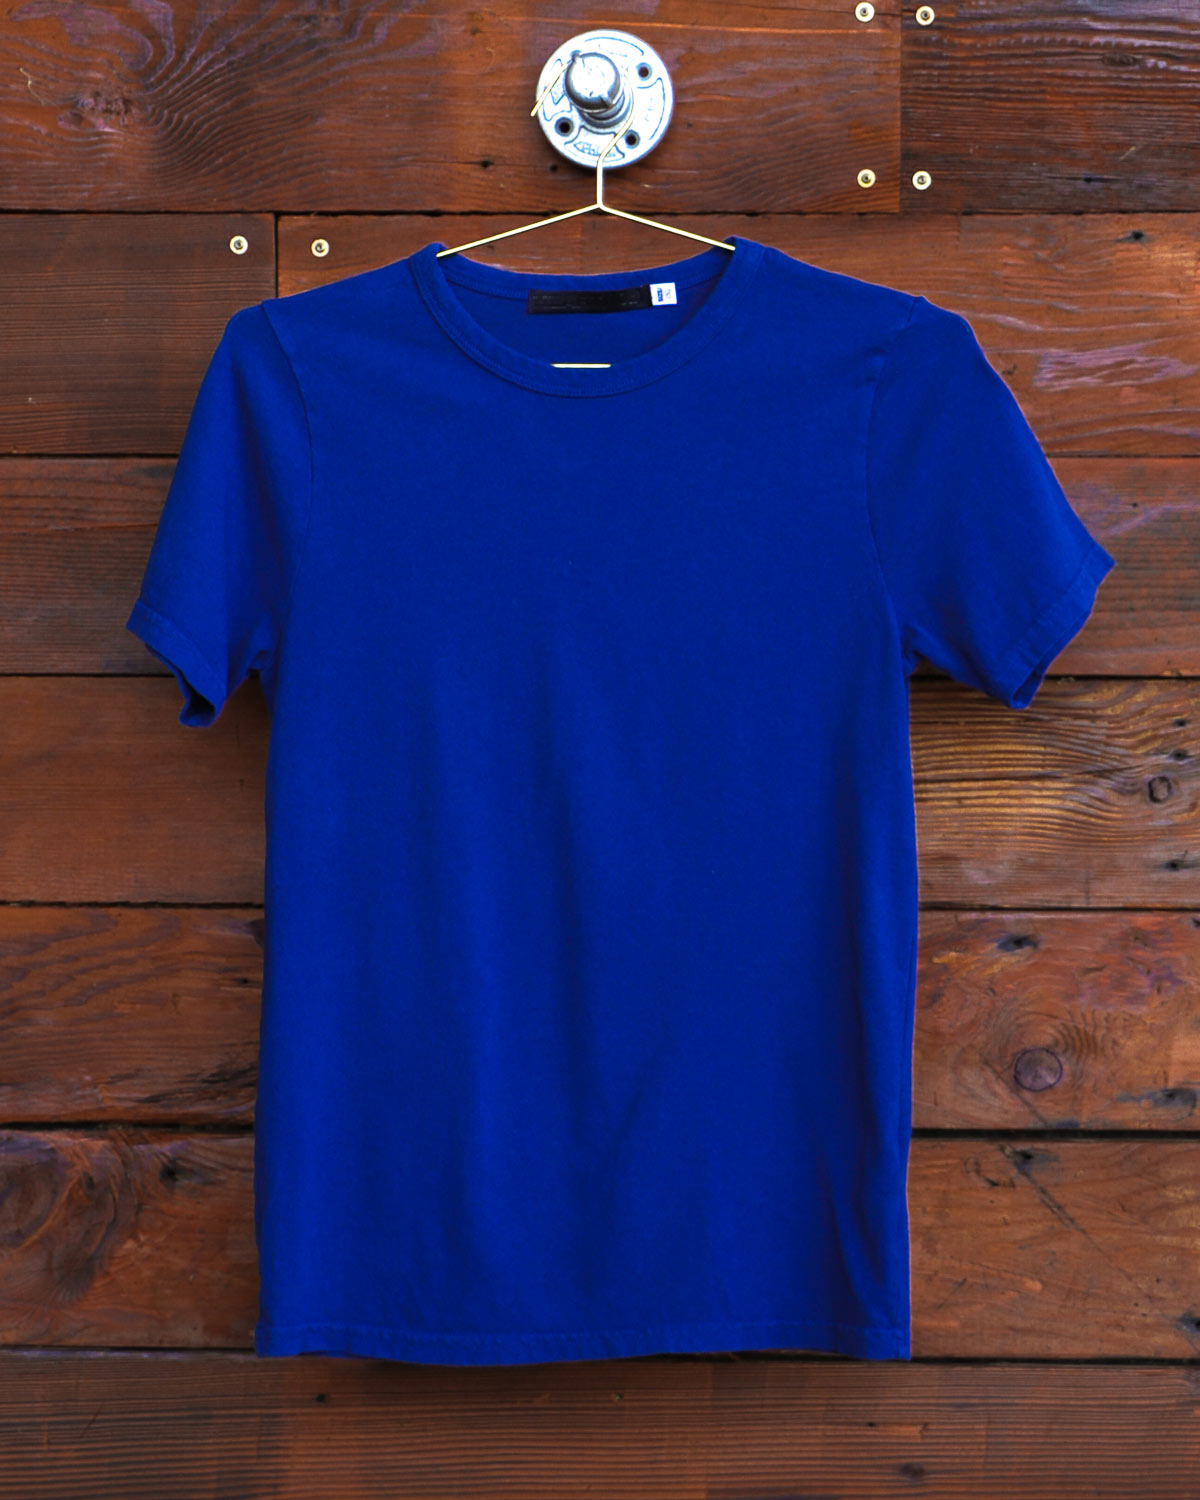 Blue Heart On logo t-shirt hanging on wood wall